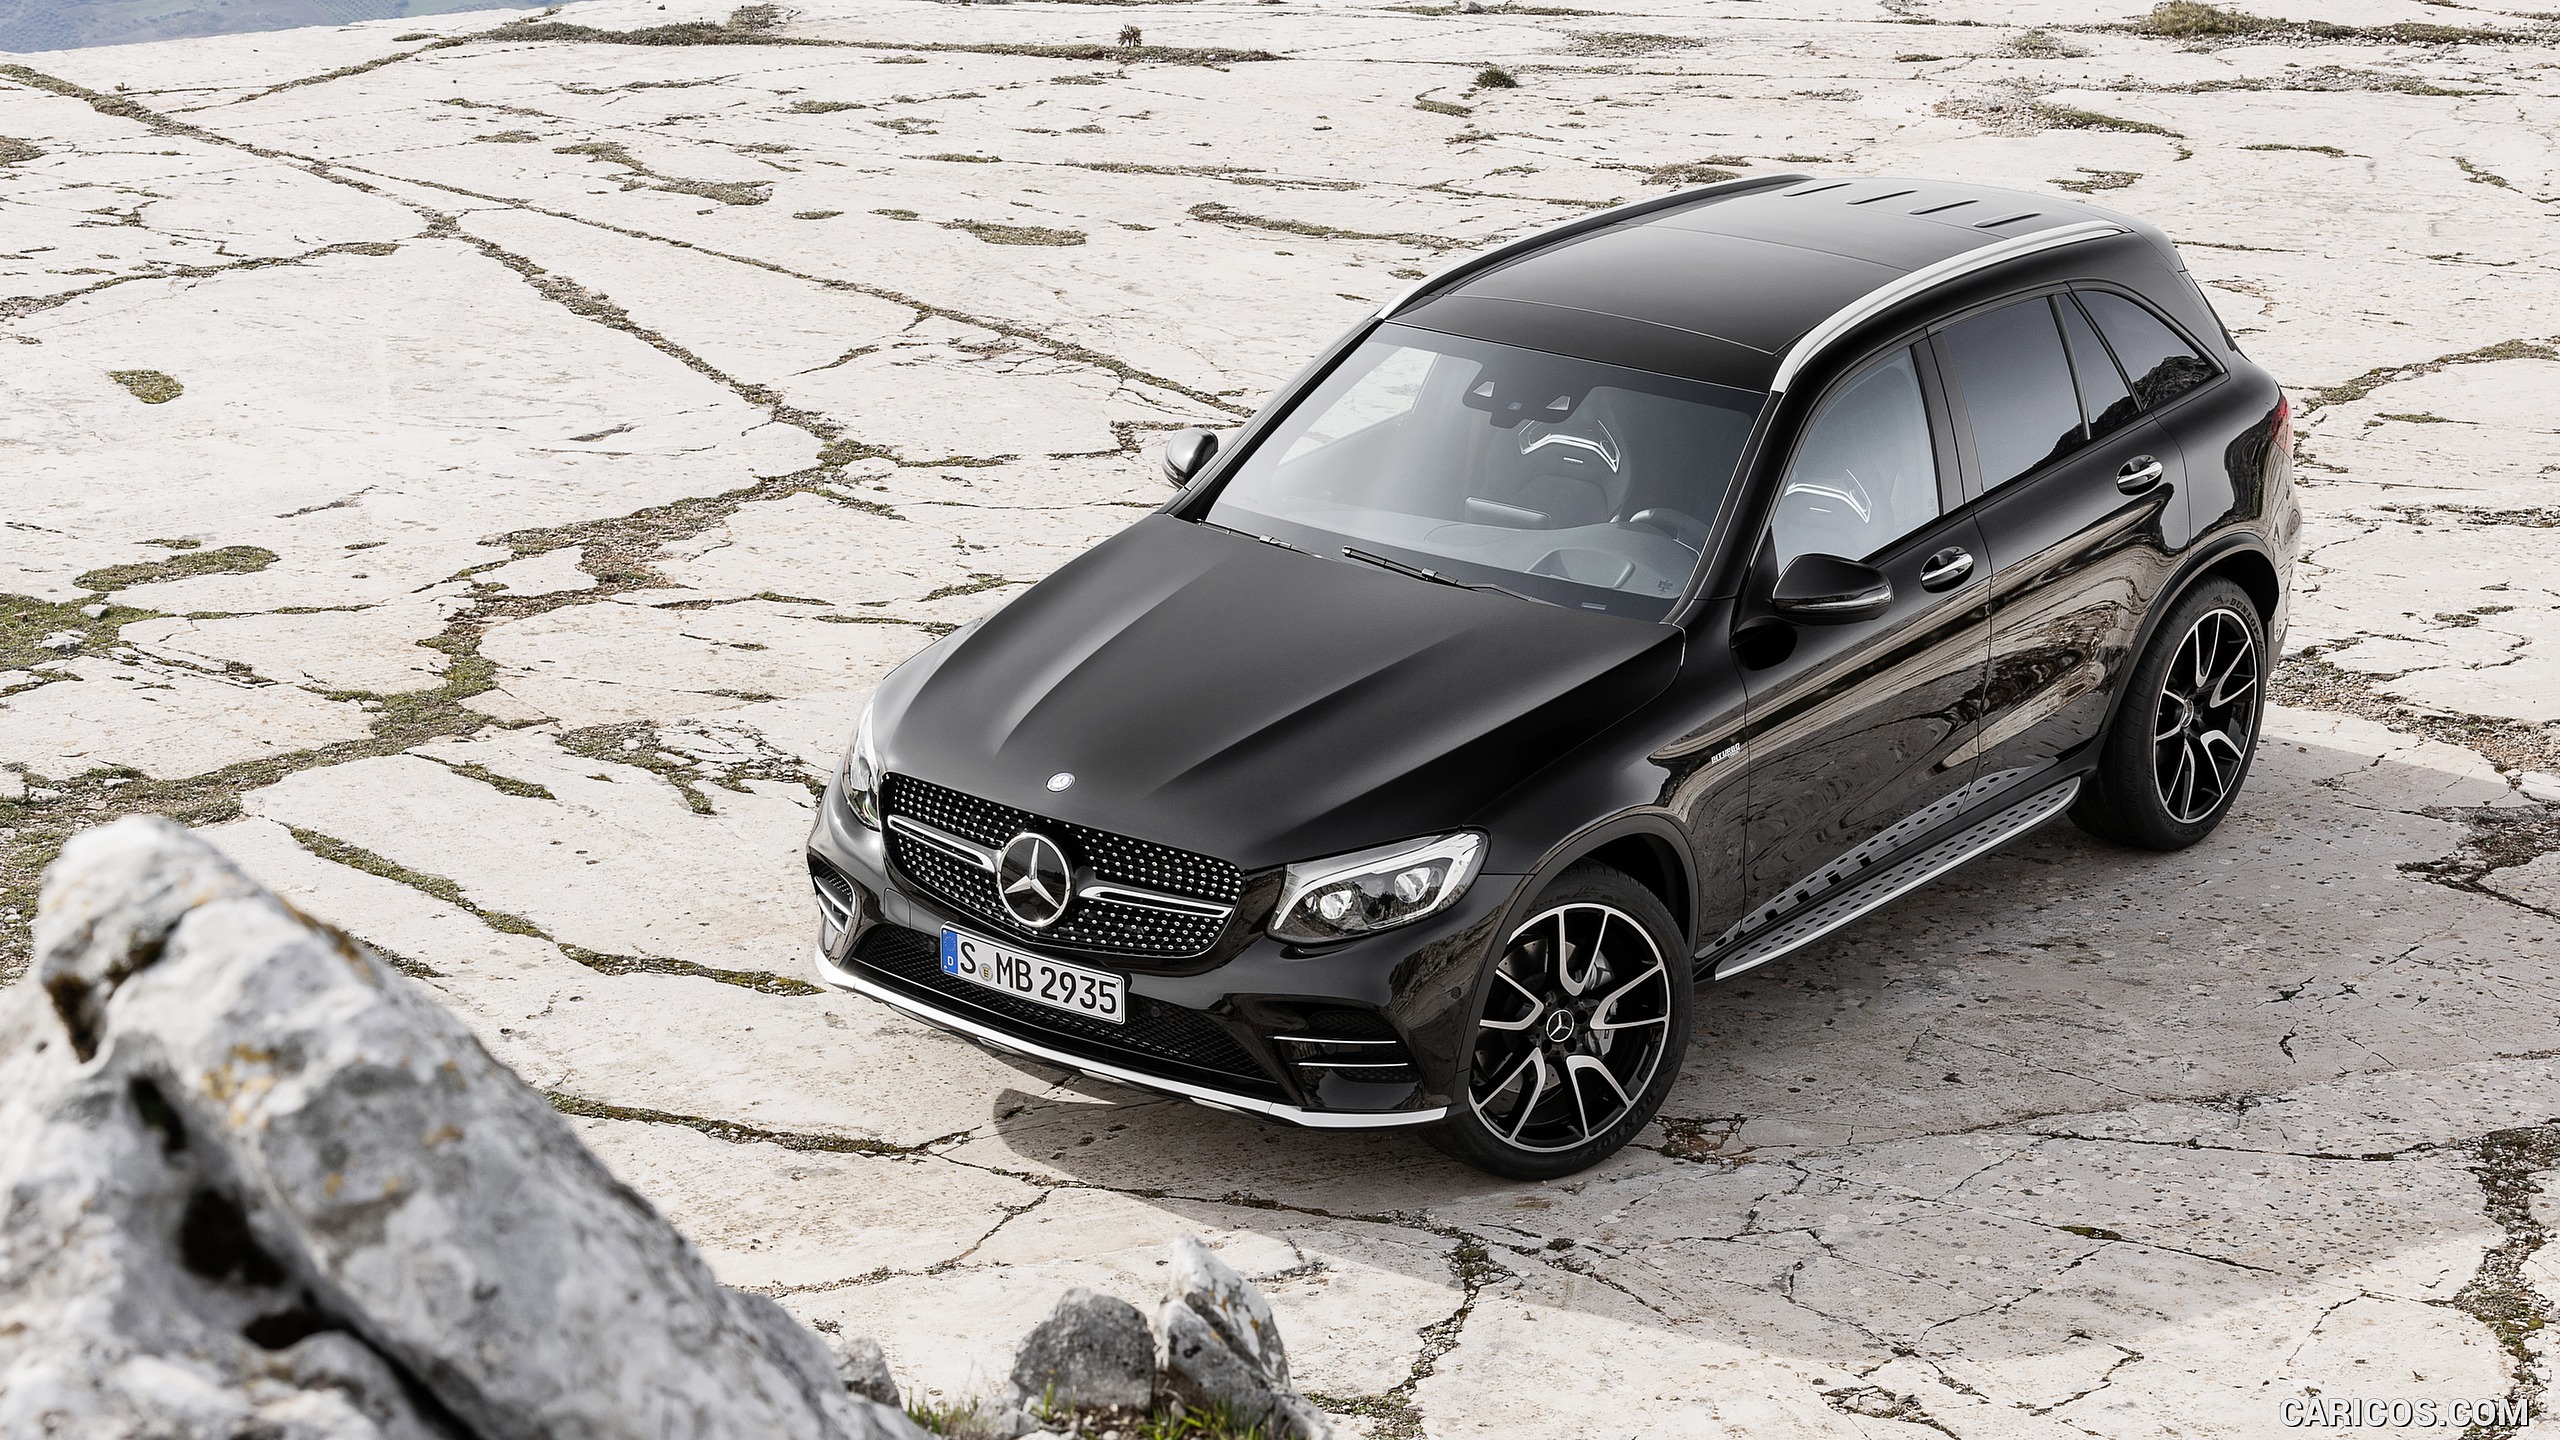 2017 Mercedes-AMG GLC 43 4MATIC (Chassis: X253, Color: Obsidian Black) - Top, #16 of 108